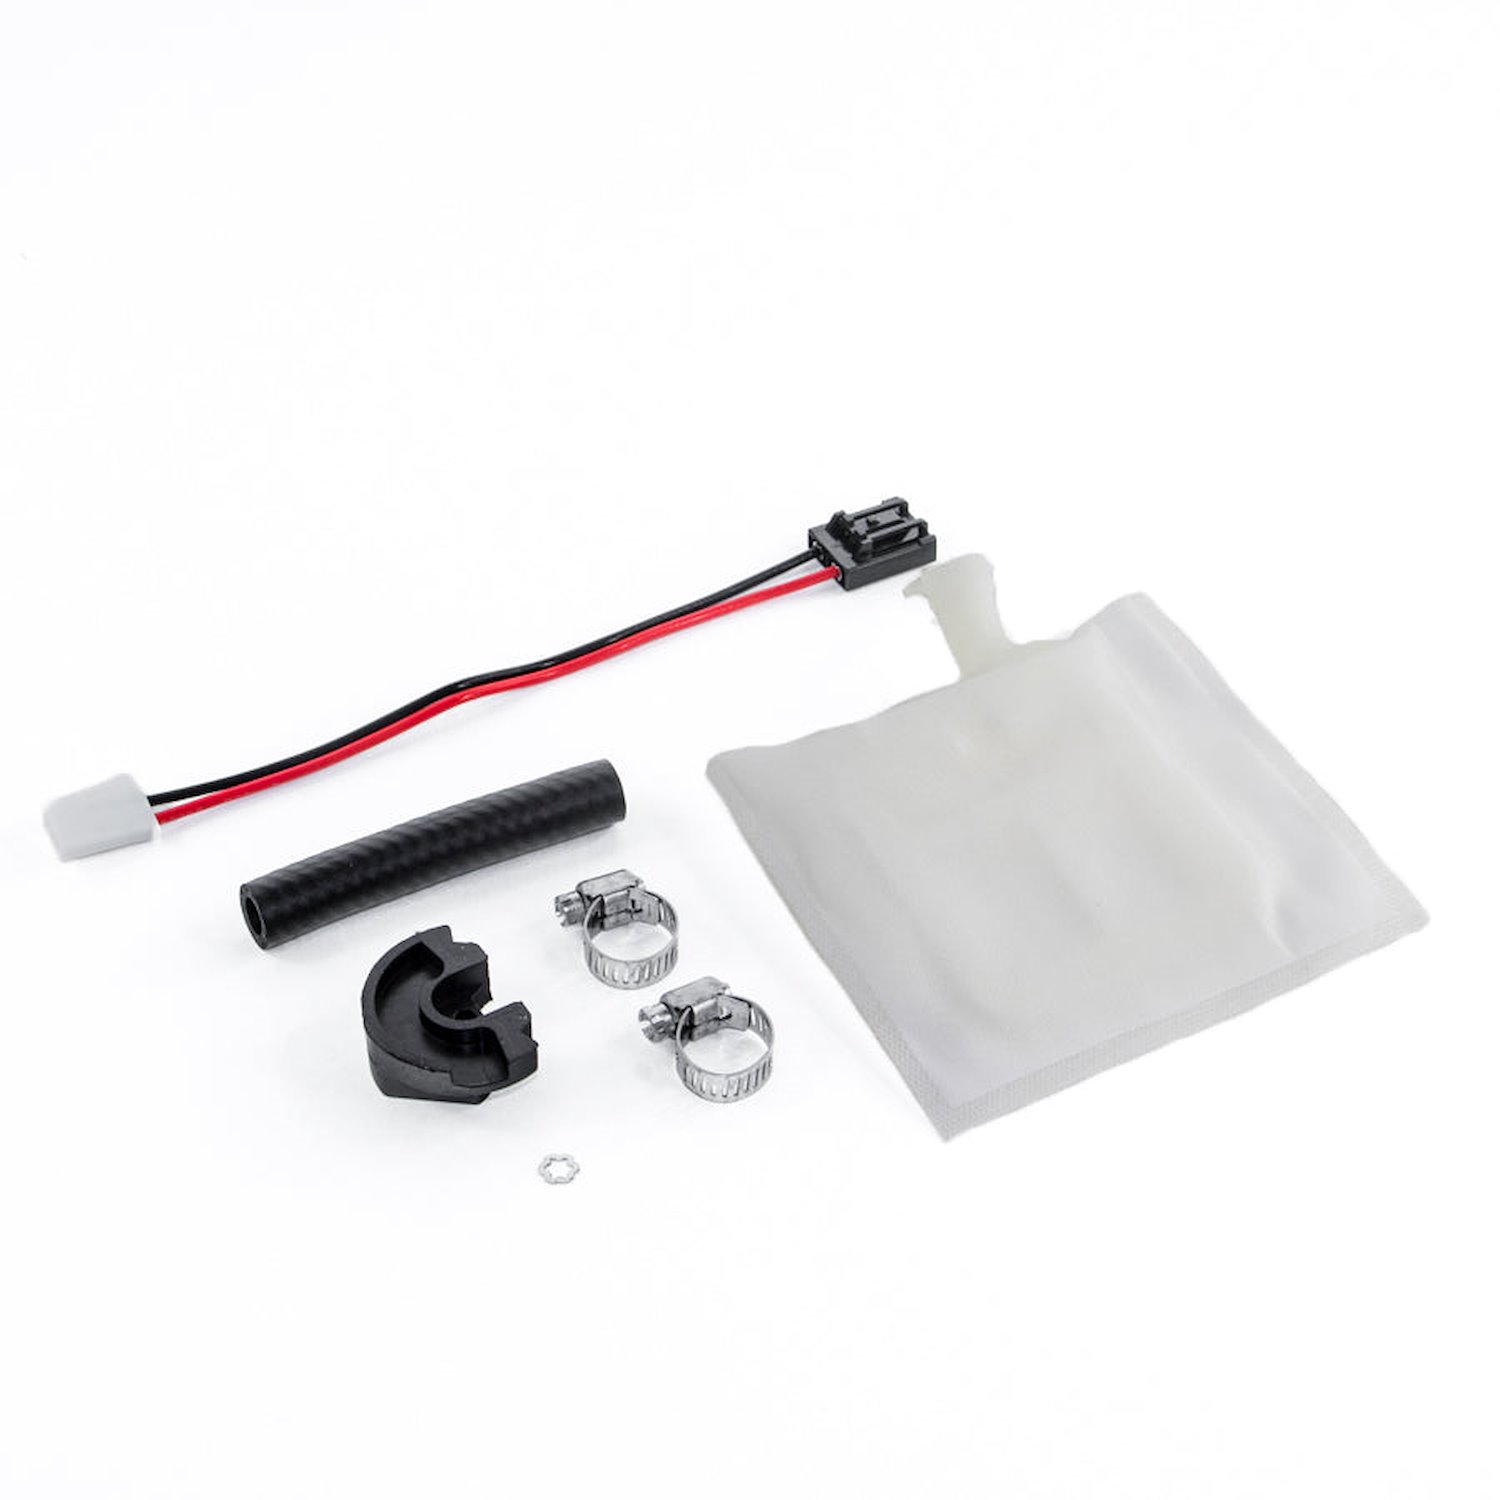 90791 Install Kit for DW300 and DW200. forester 97-07 Impreza (Includes WRX and STI) 93-07 and Legacy 90-07.